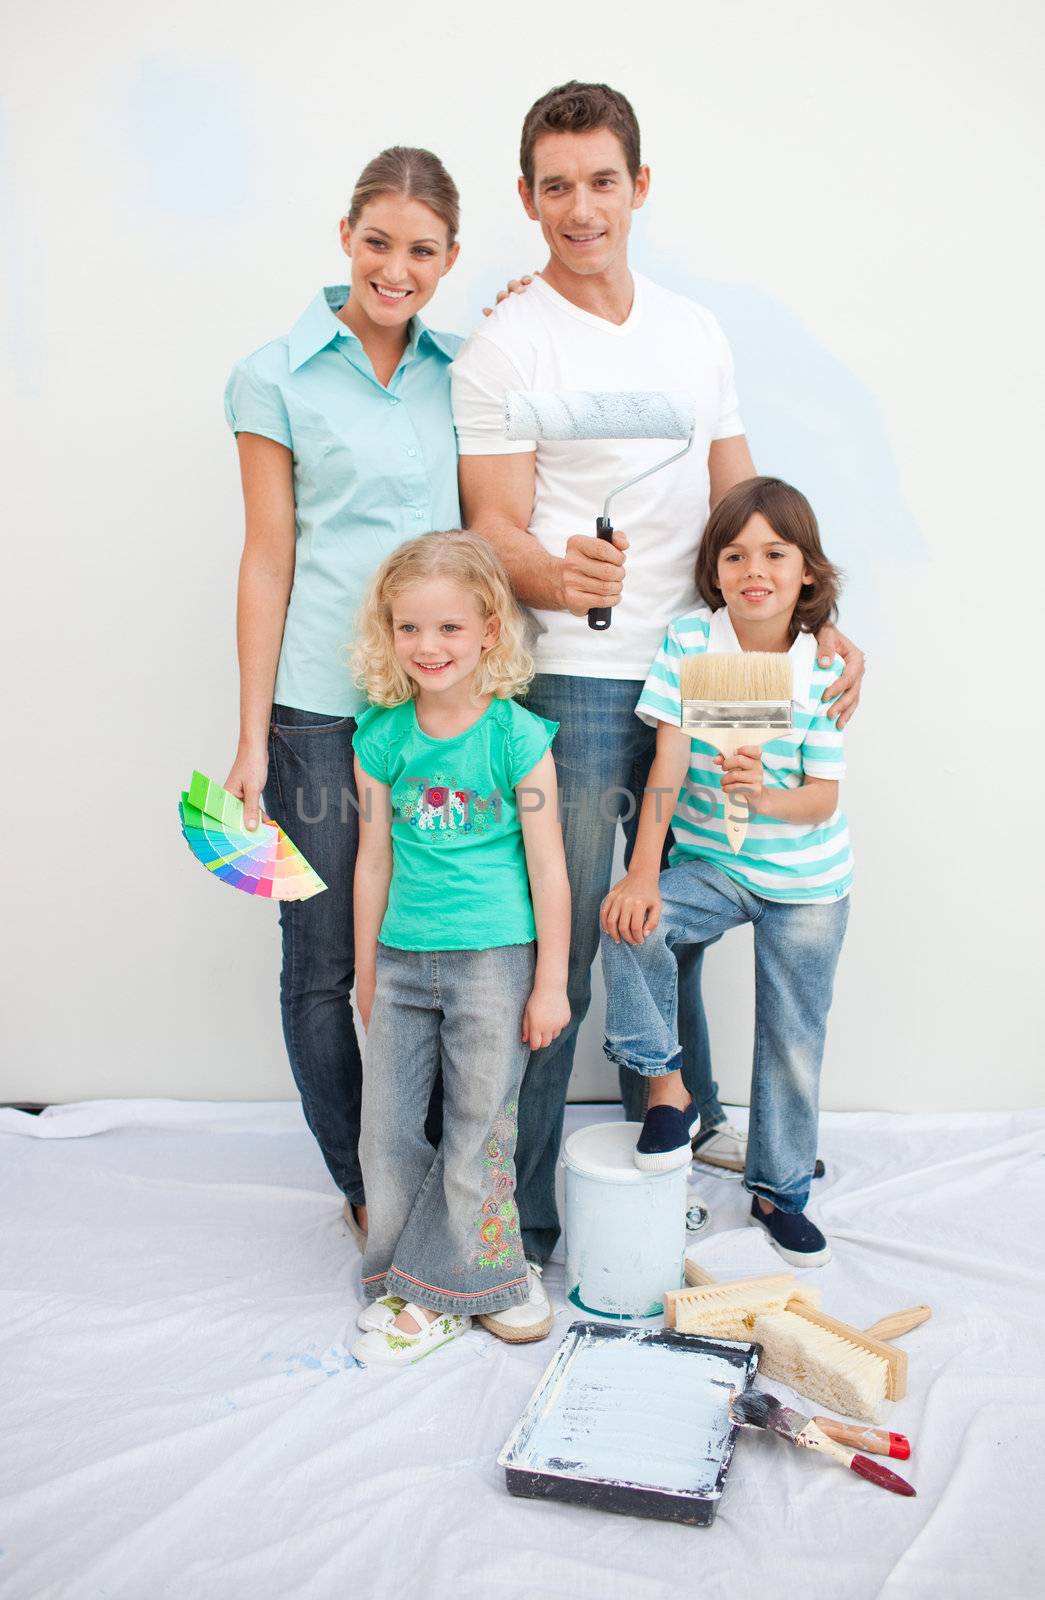 Smiling family decorating their house  by Wavebreakmedia